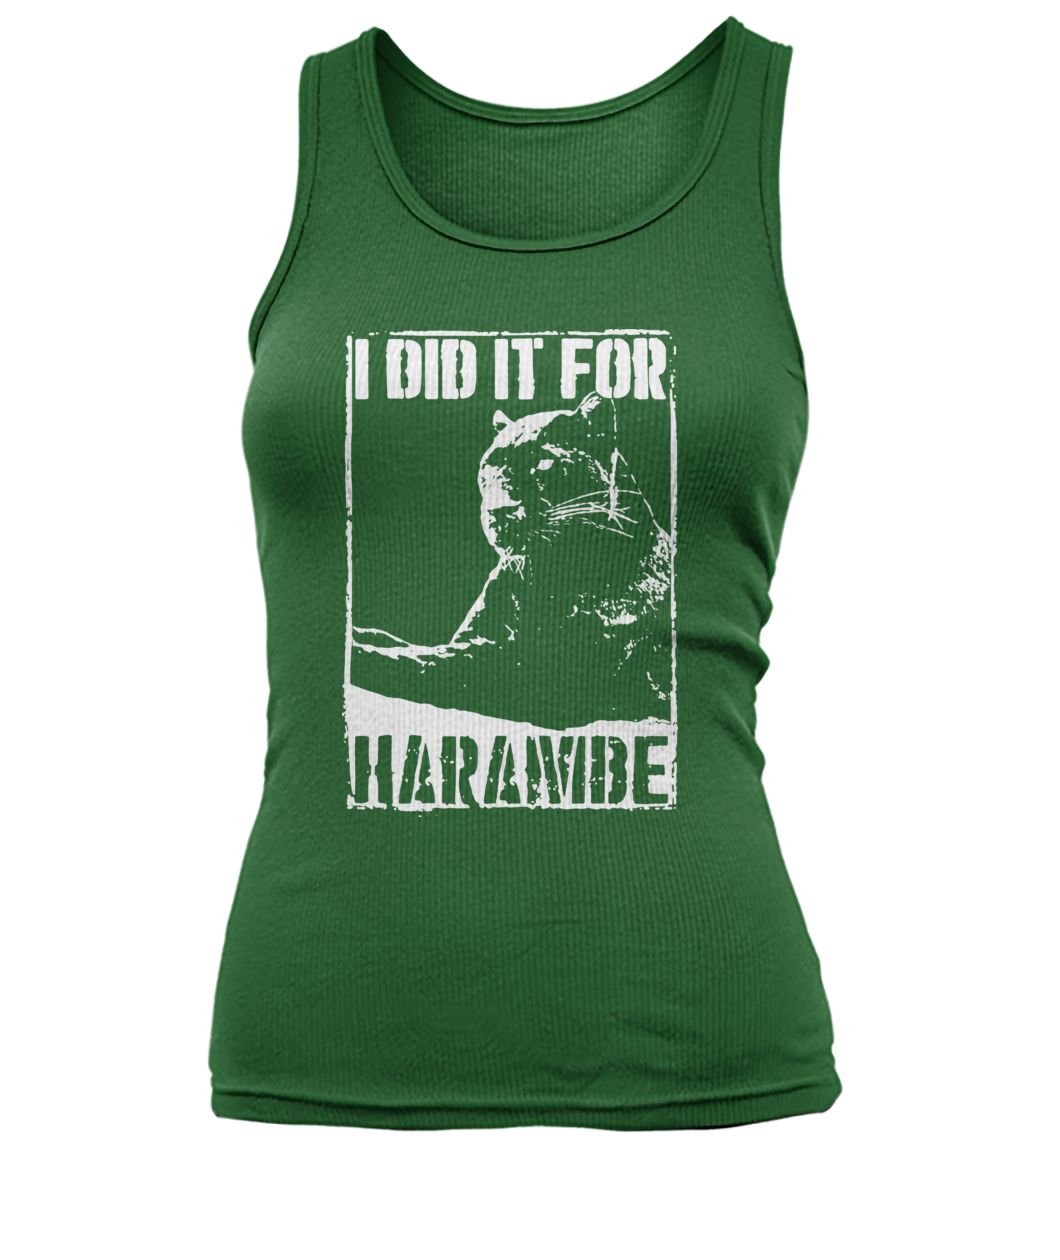 Black panther I did it for harambe women's tank top